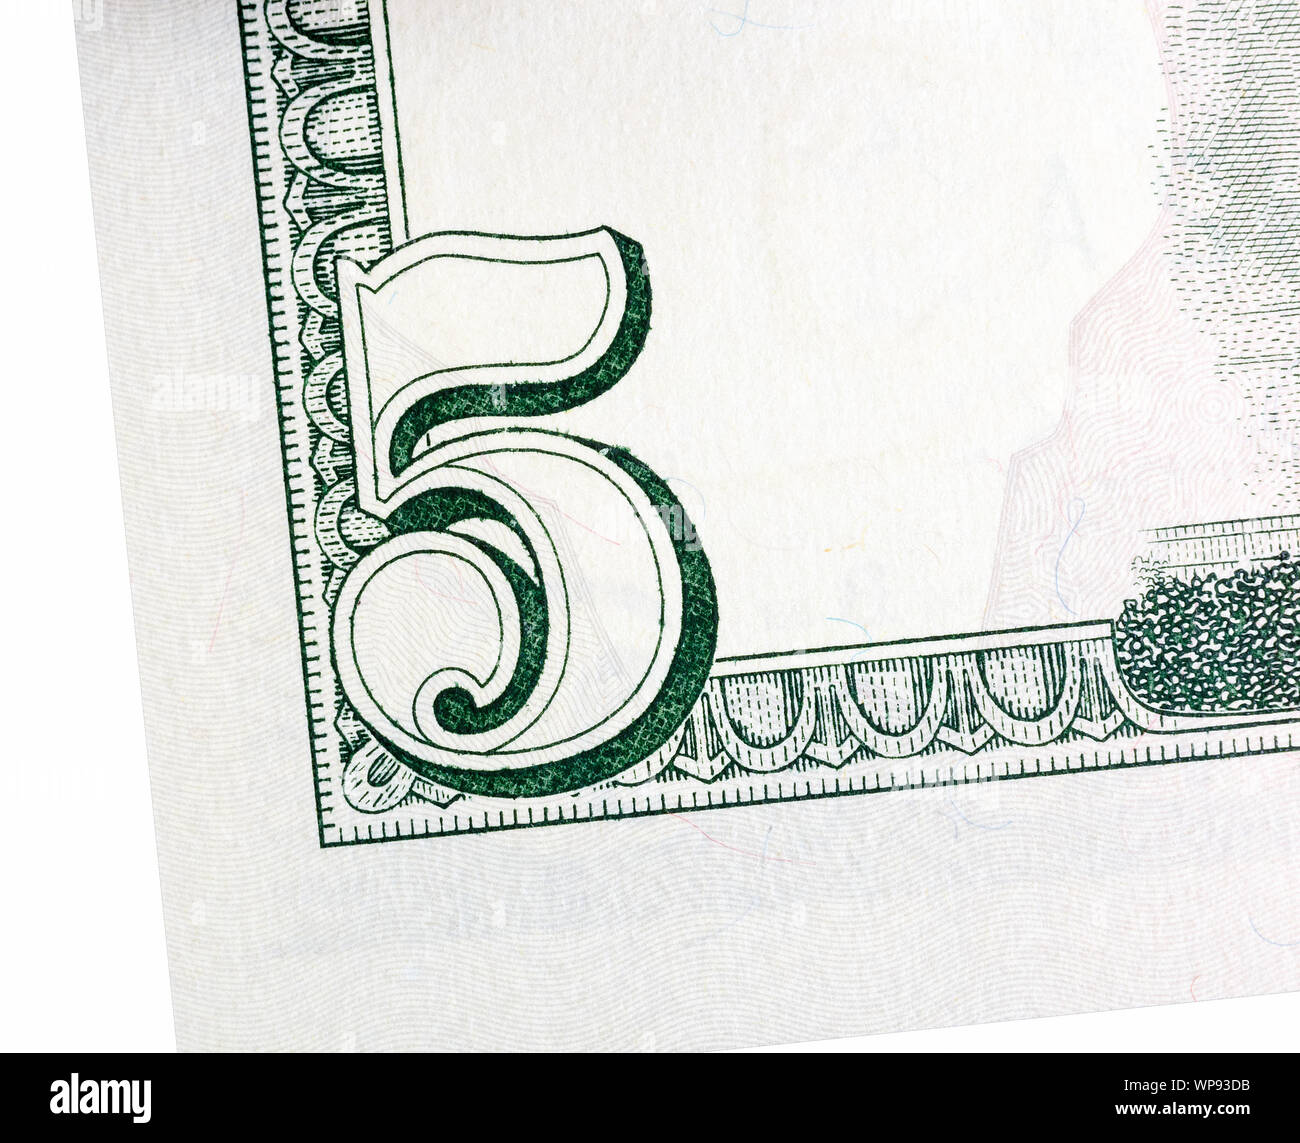 The element of five dollars bill on macro, isolated. Stock Photo